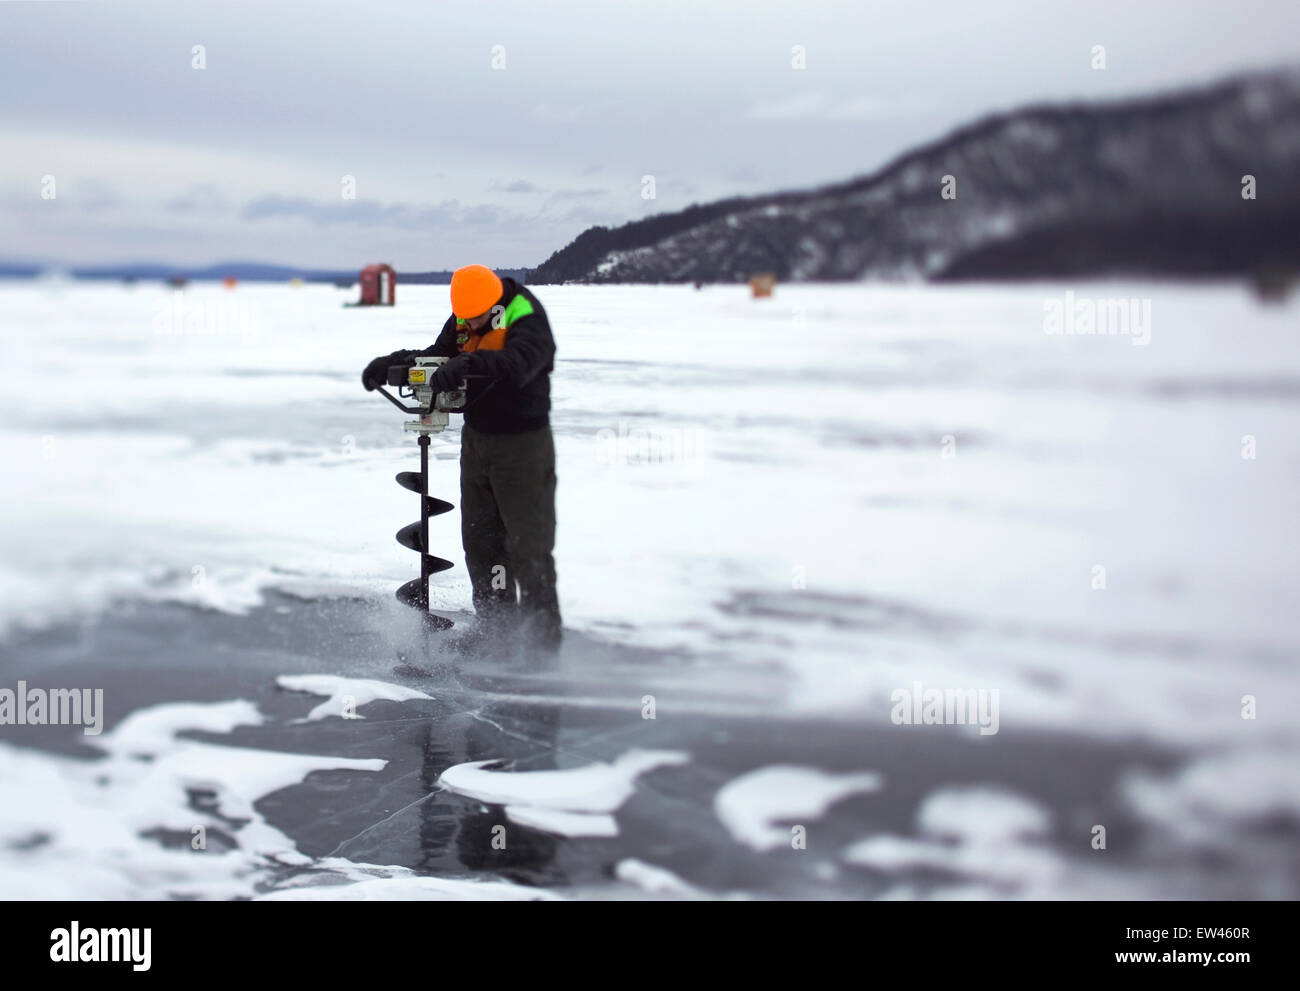 An ice fisherman uses a skimmer to clear a just-opened hole on a